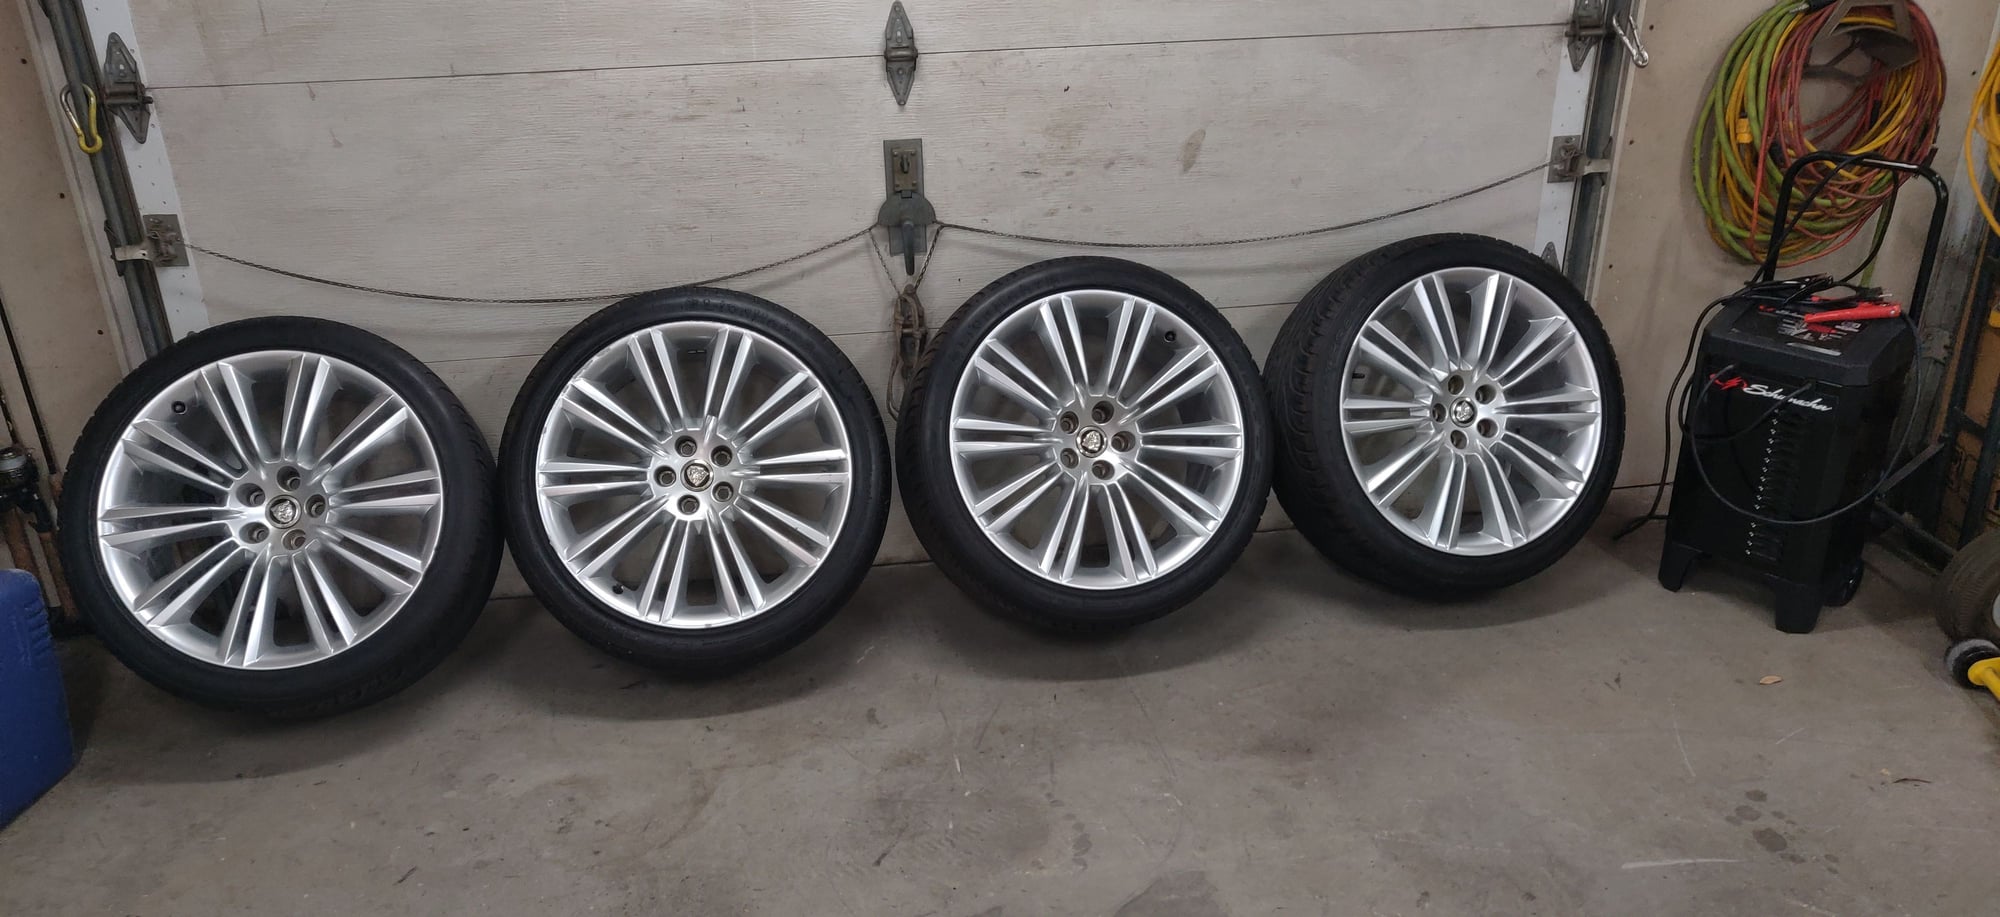 Wheels and Tires/Axles - Jaguar kasuga 20x10 and 20x9 staggered wheels - Used - All Years Any Make All Models - Seminole, FL 33776, United States